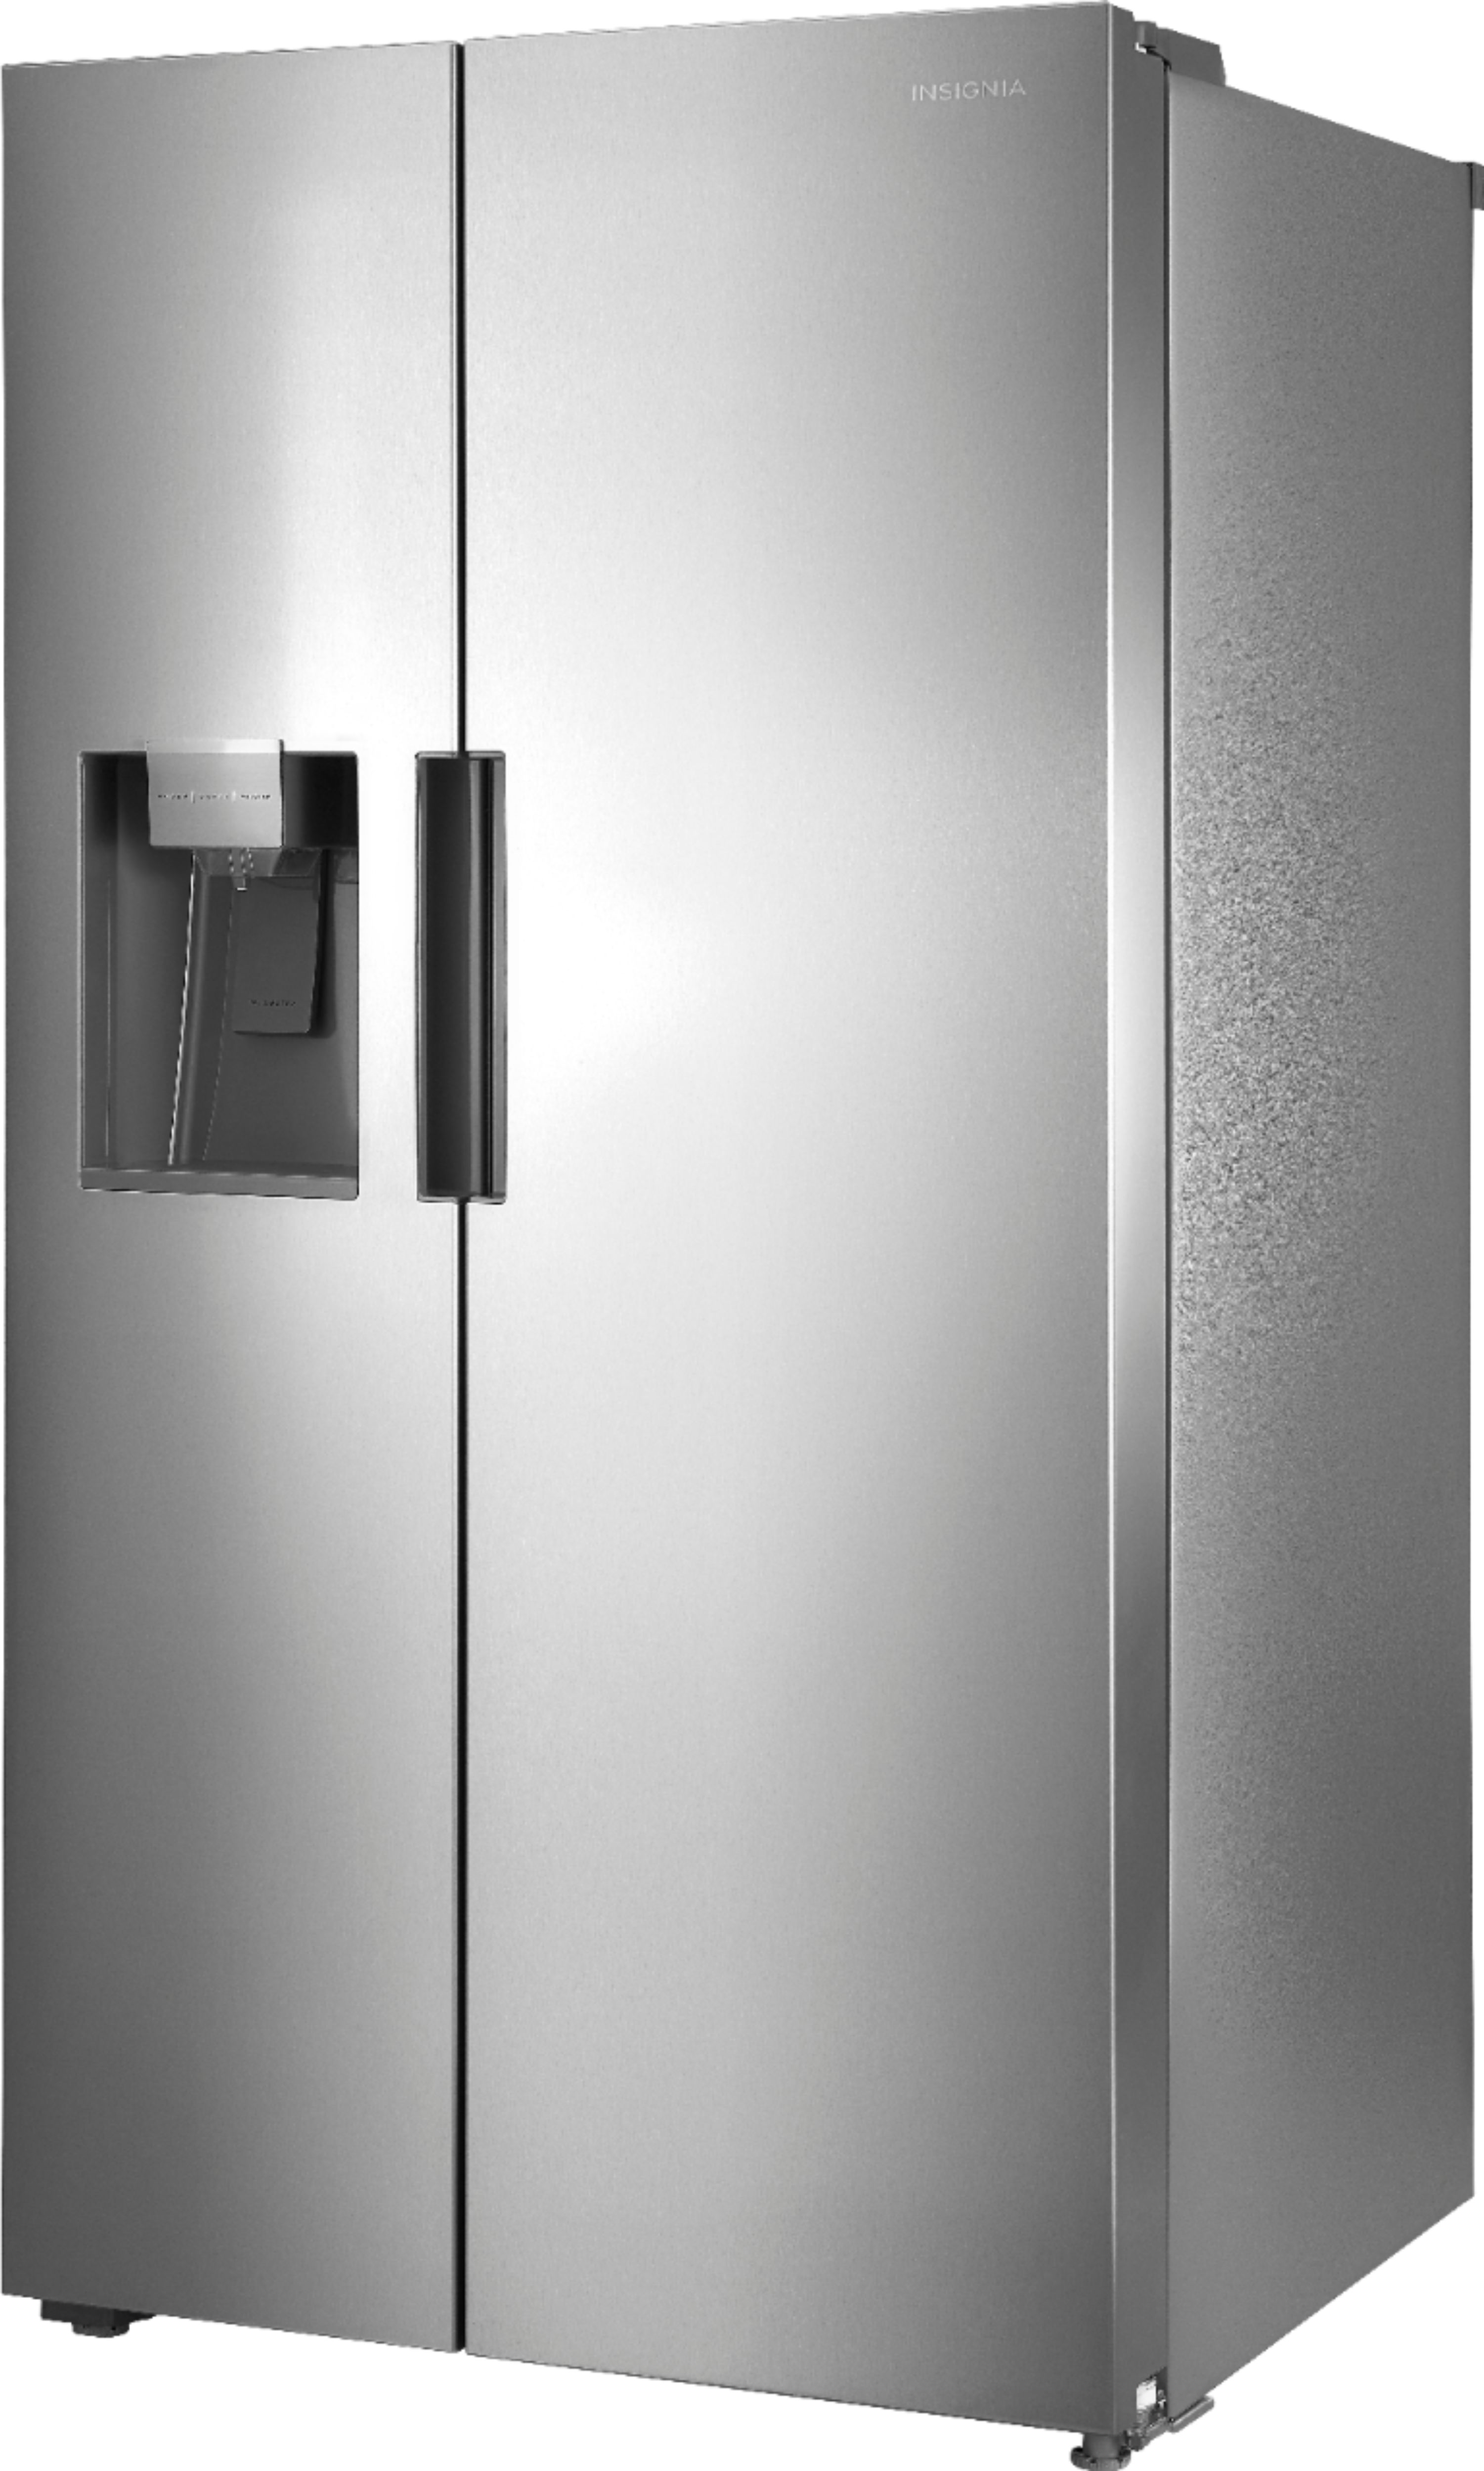 Left View: Viking - Professional 7 Series 13 Cu. Ft. Built-In Refrigerator - Pacific gray